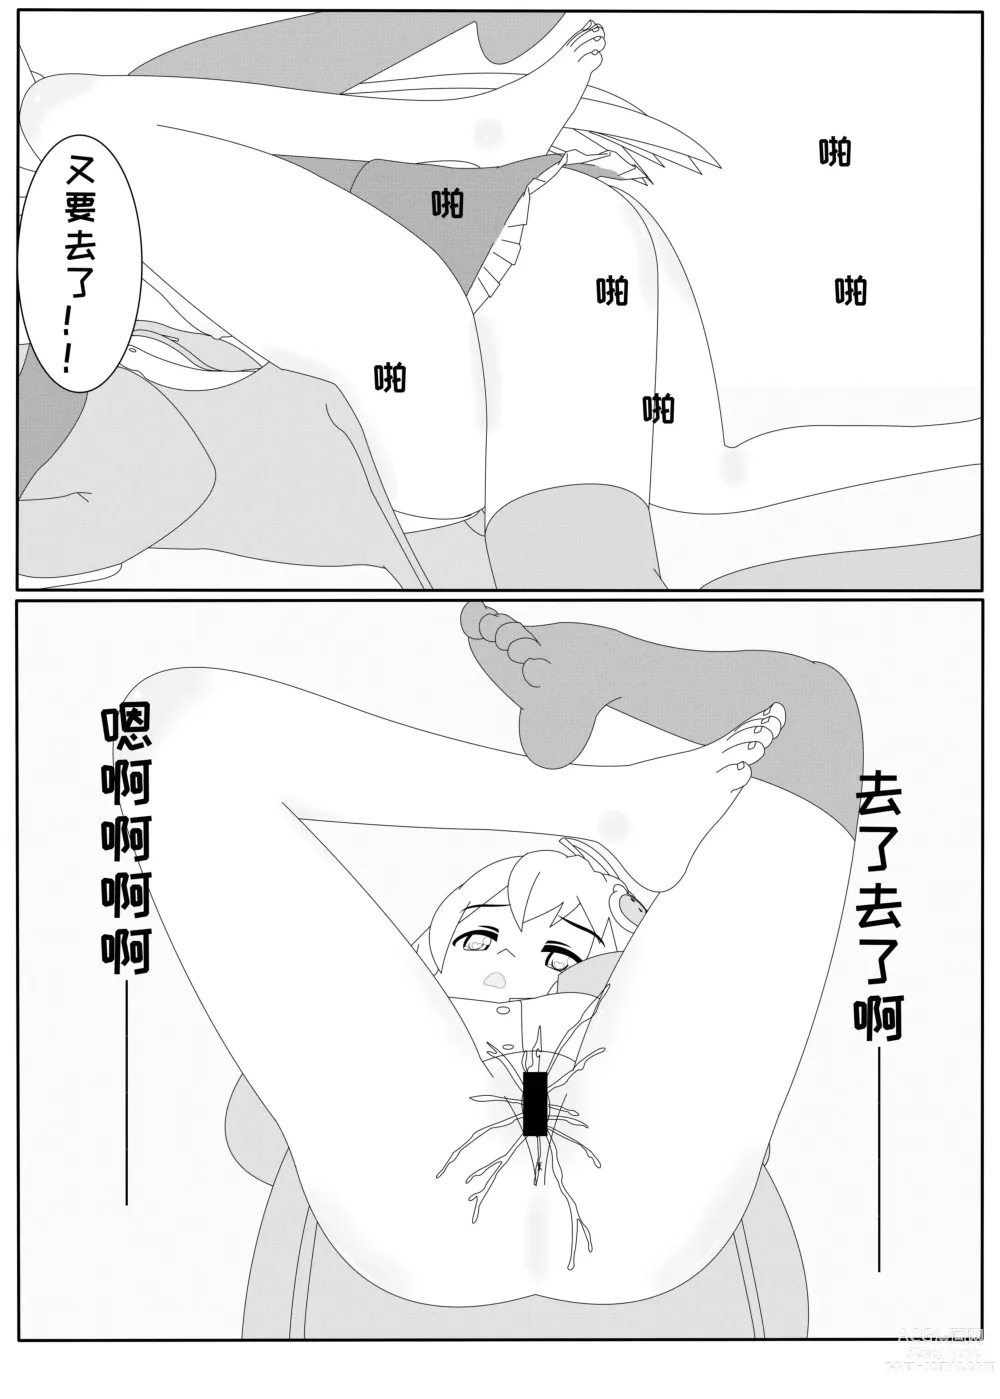 Page 22 of doujinshi 鲸之恋2（西丝特Xether）